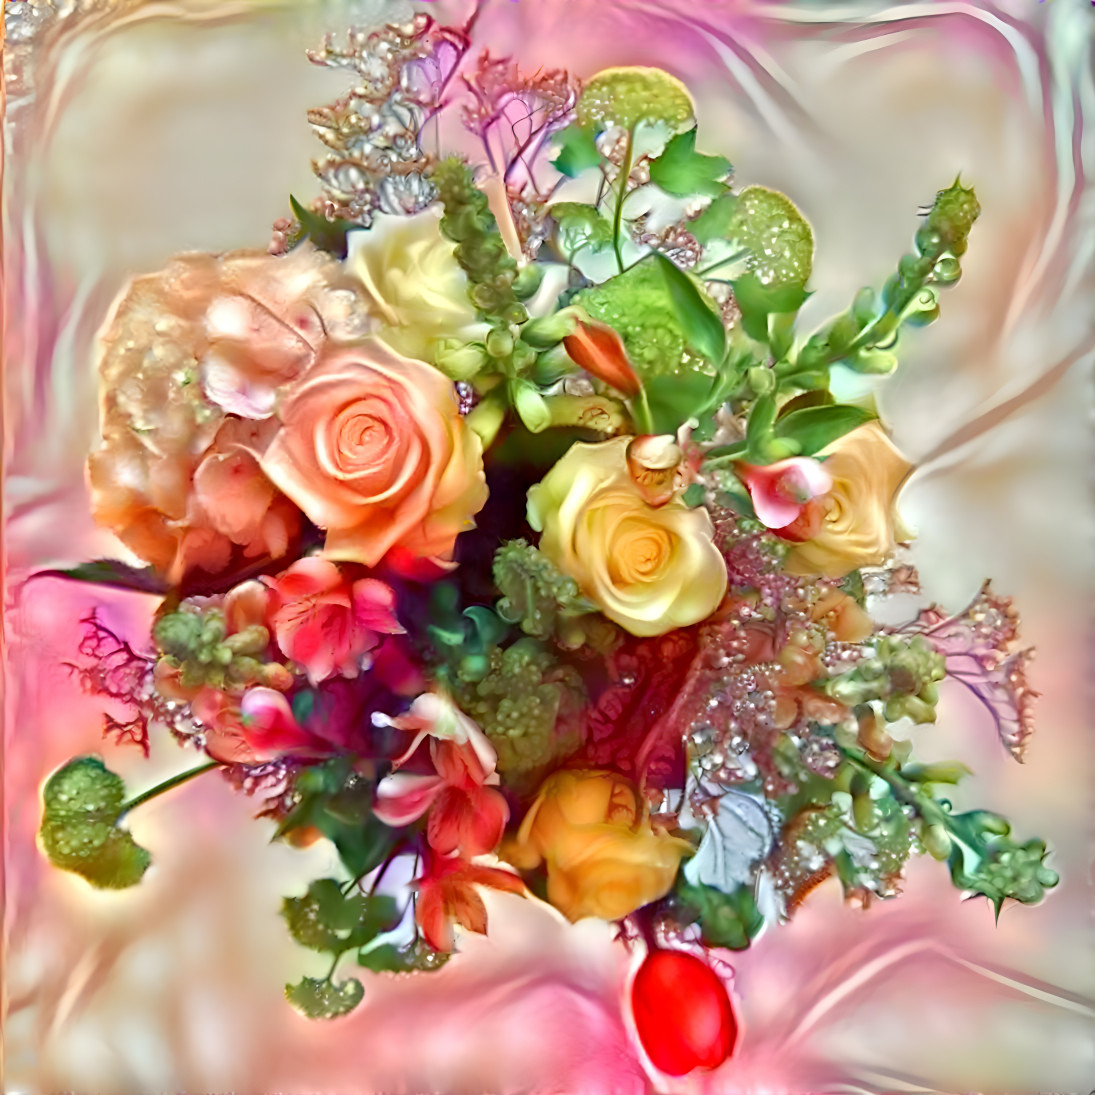 A beautiful and colorful bouquet